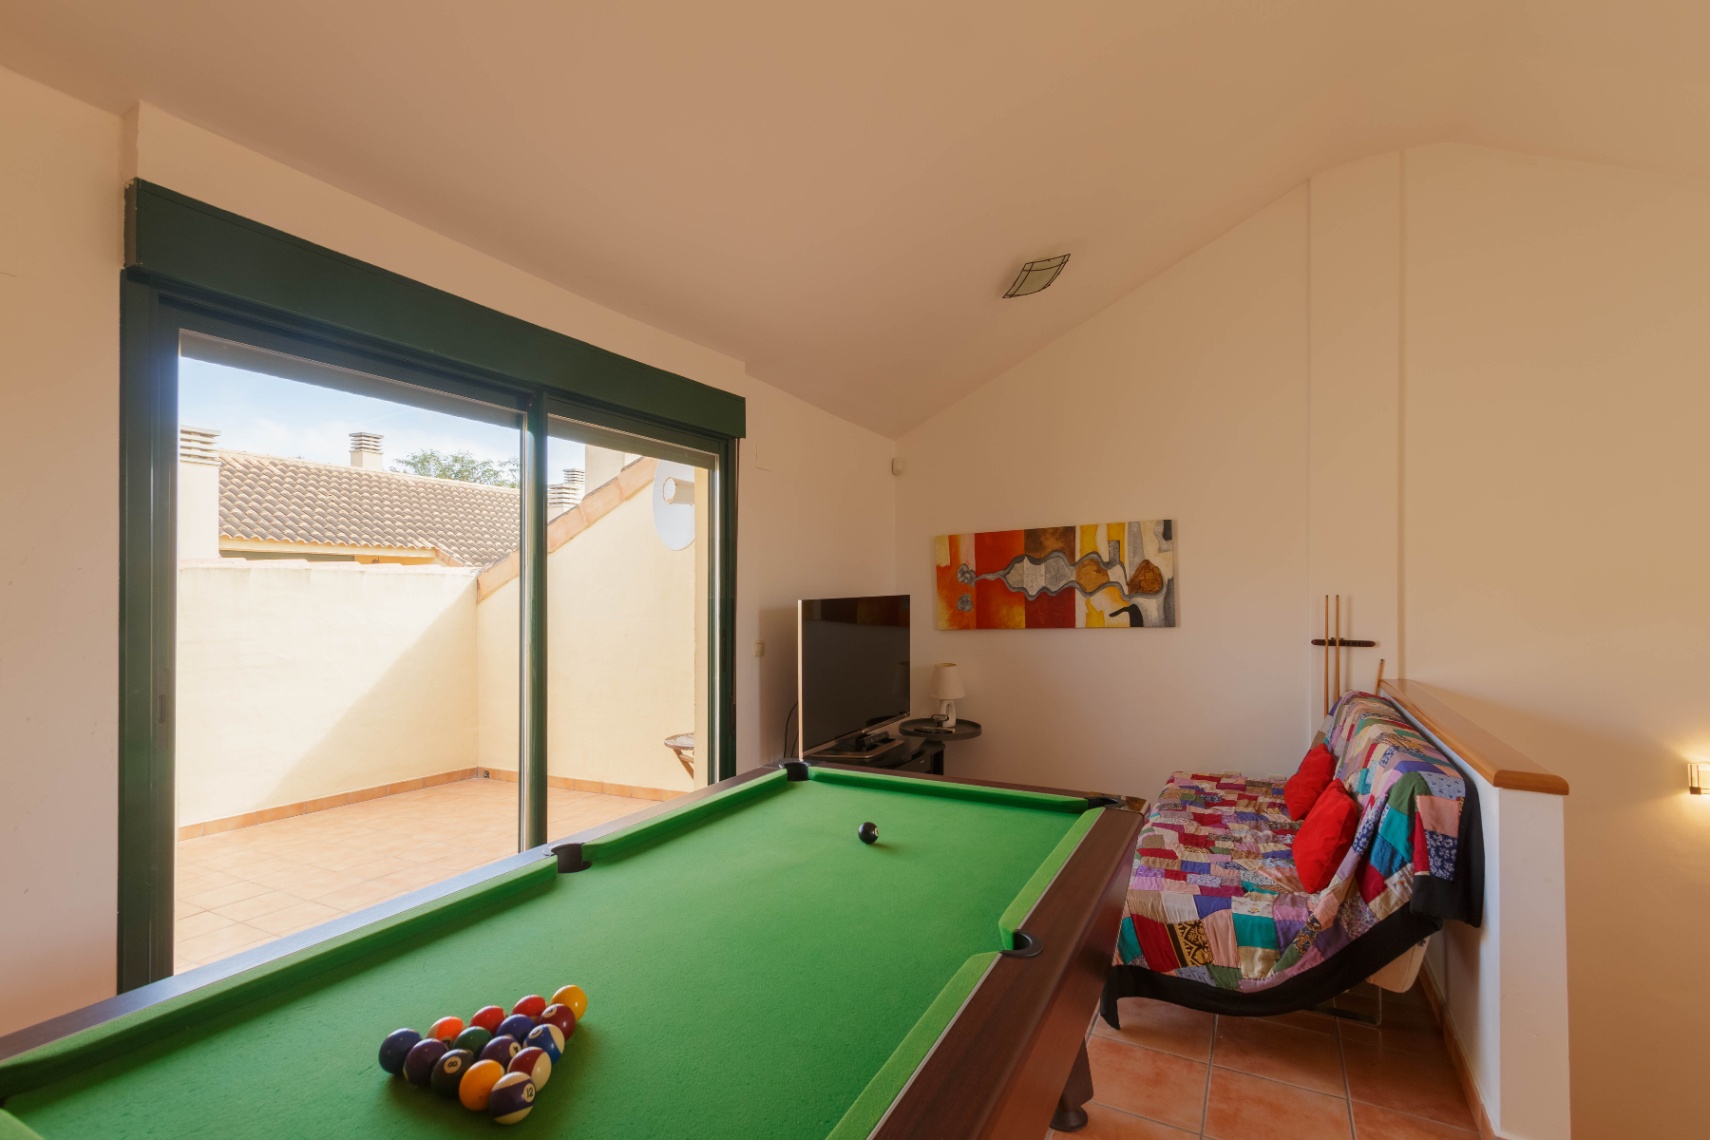 4 bedroom townhouse situated in the Arenal